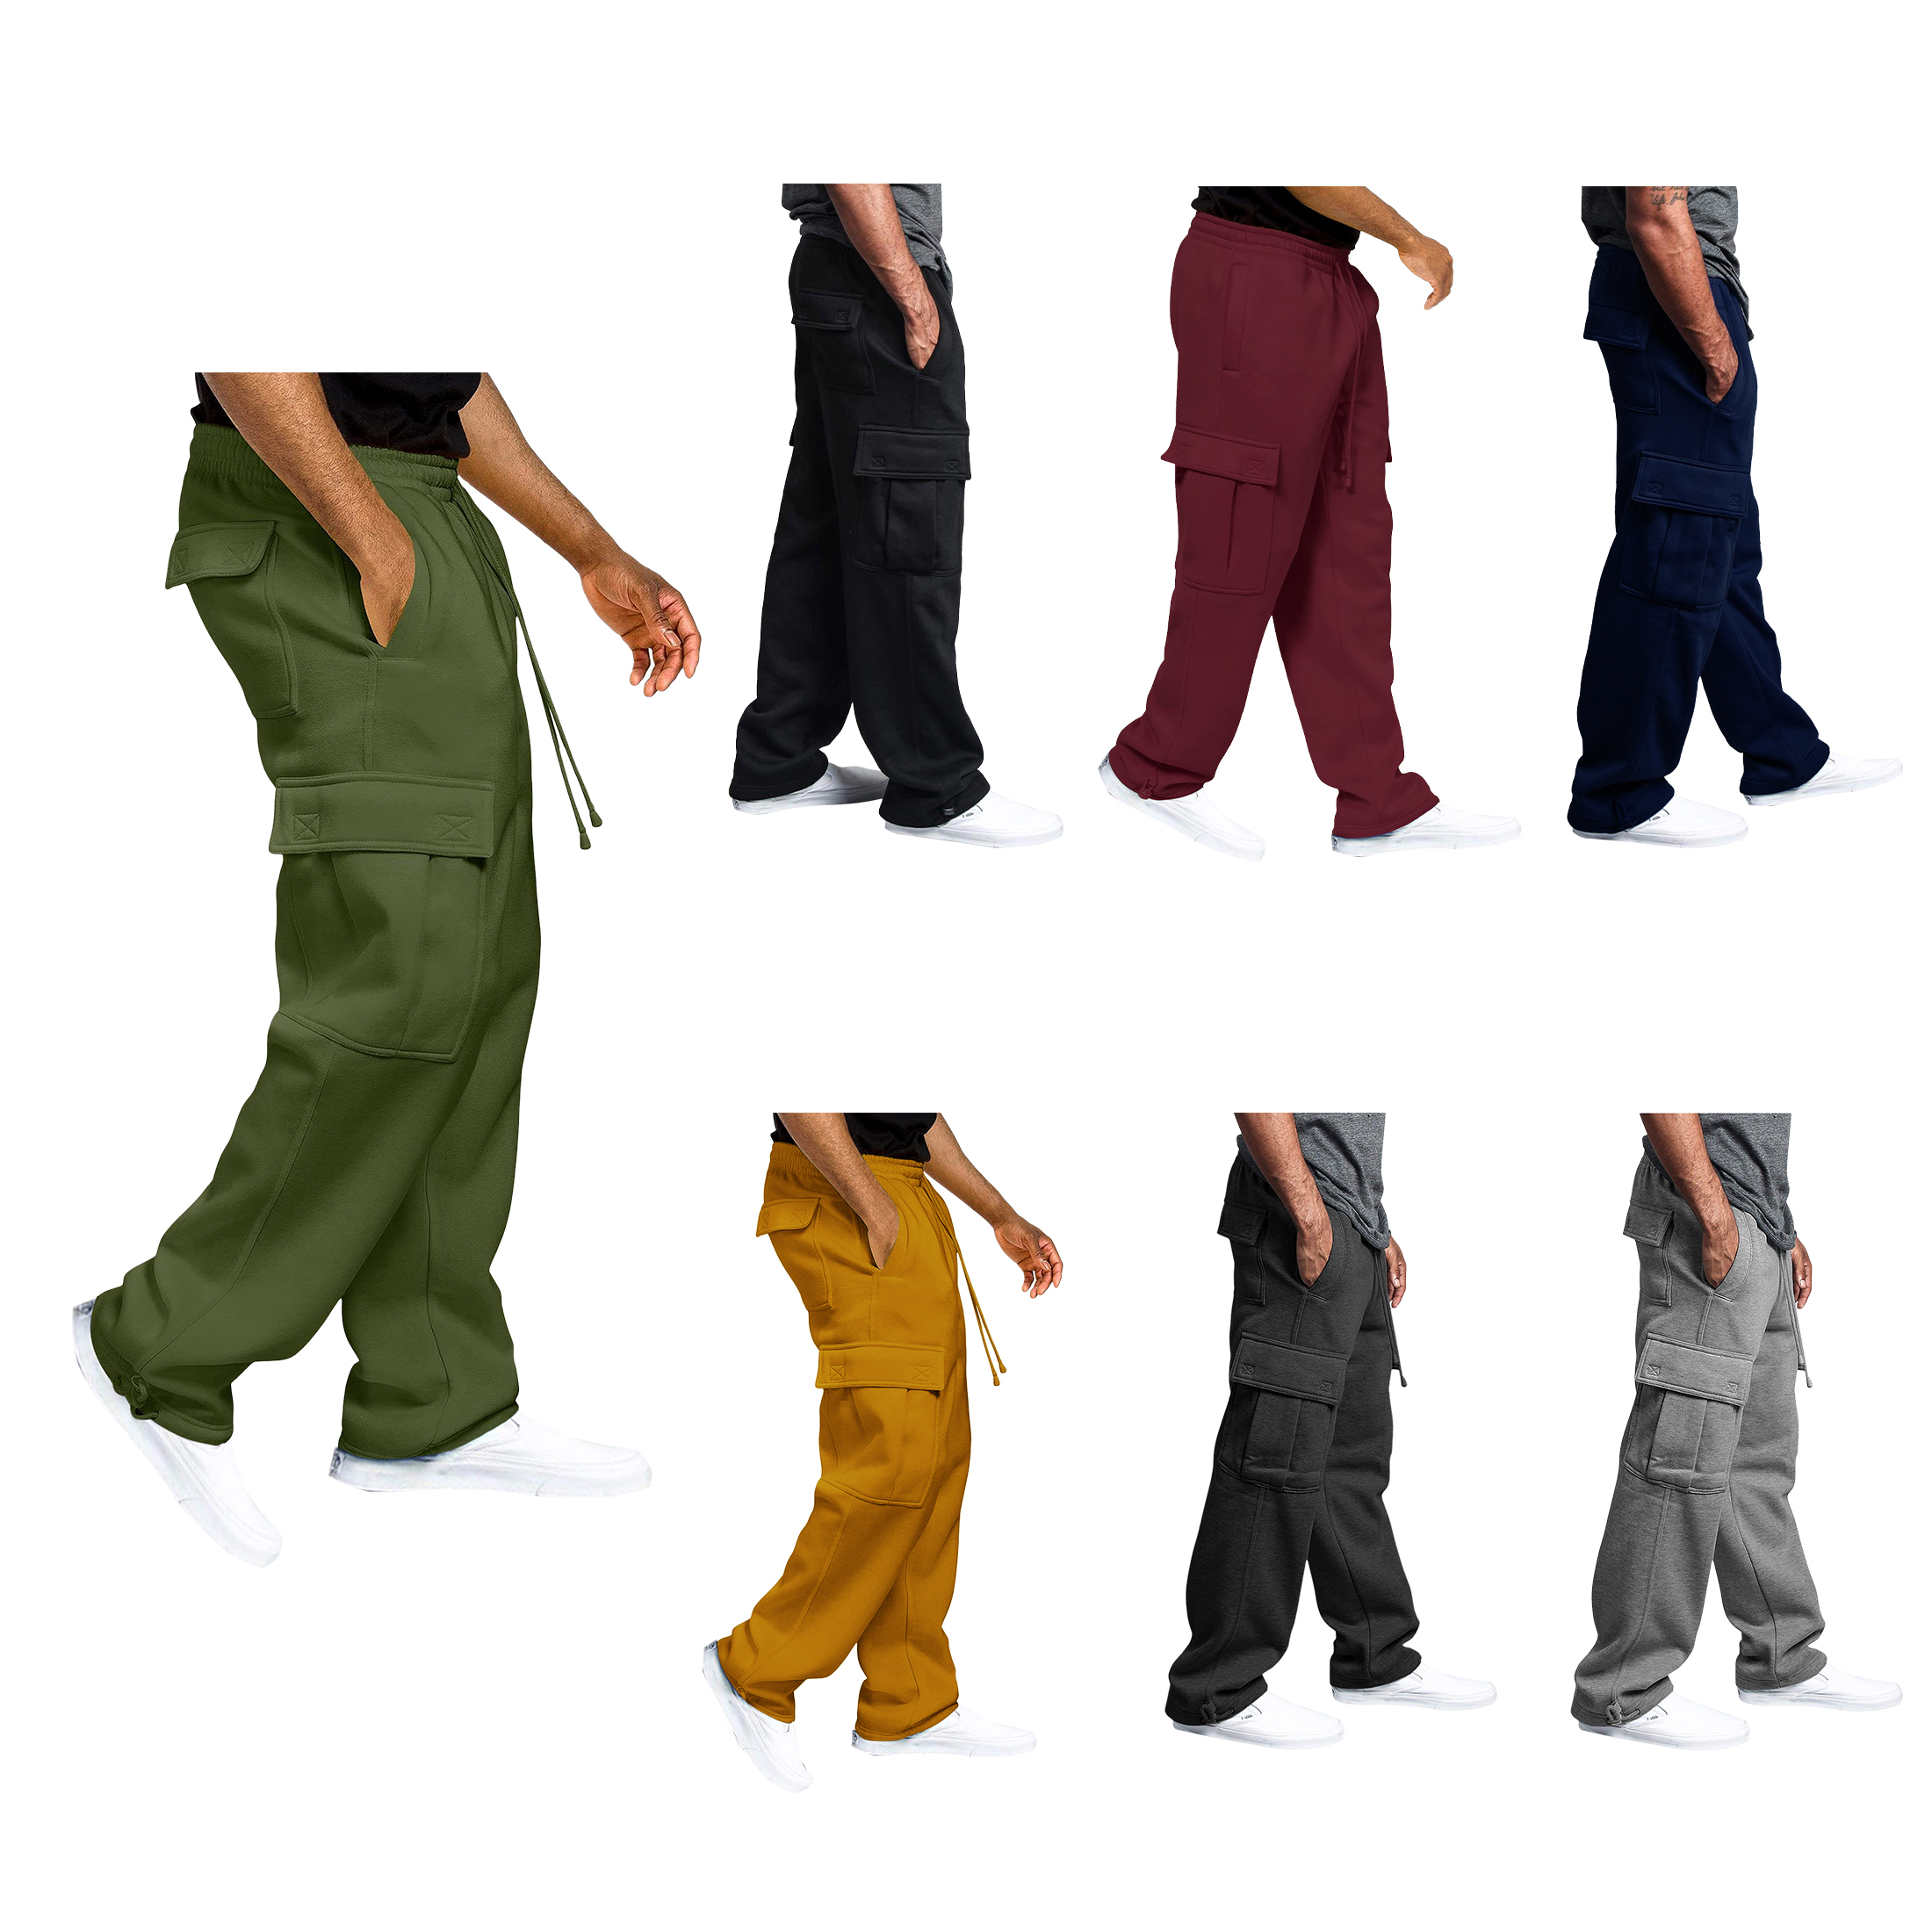 2-Pack: Men's Casual Solid Cargo Jogger Sweatpants With Pockets - M